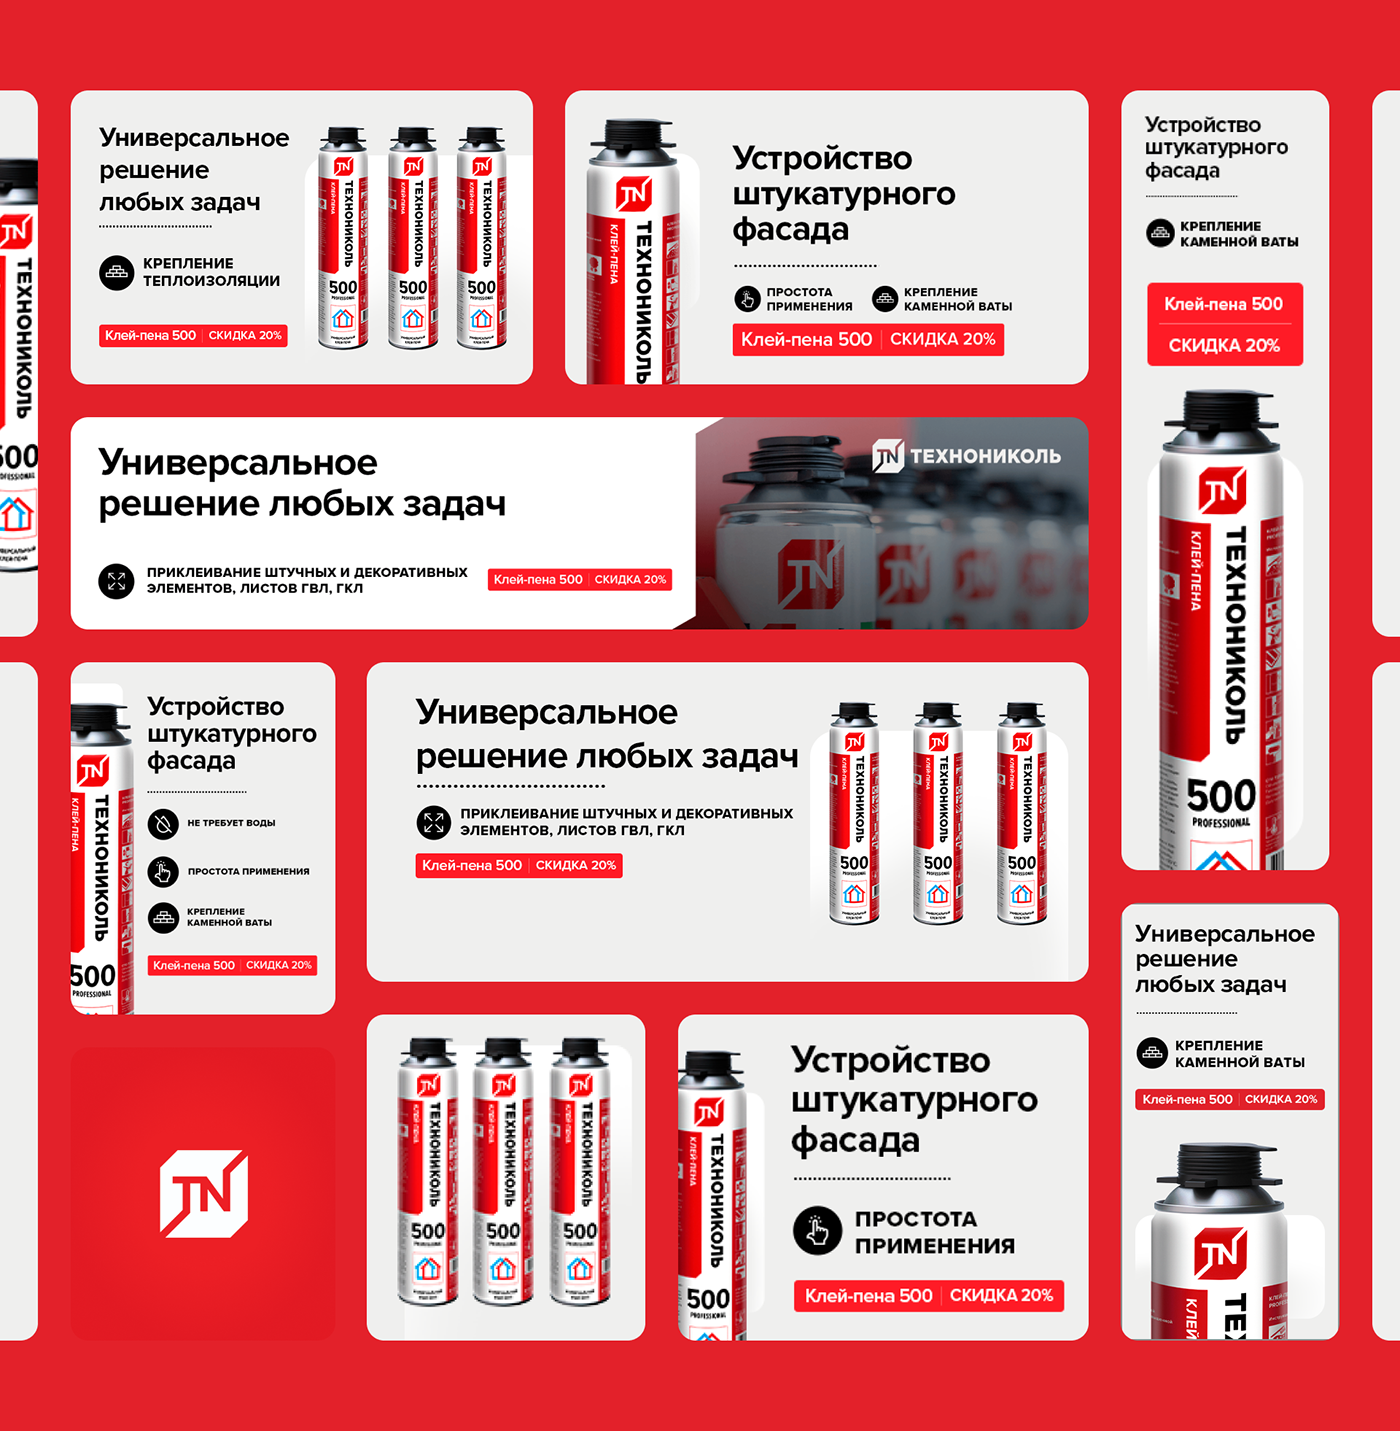 ad banners design concept red social media target креативы реклама таргет таргетированная реклама